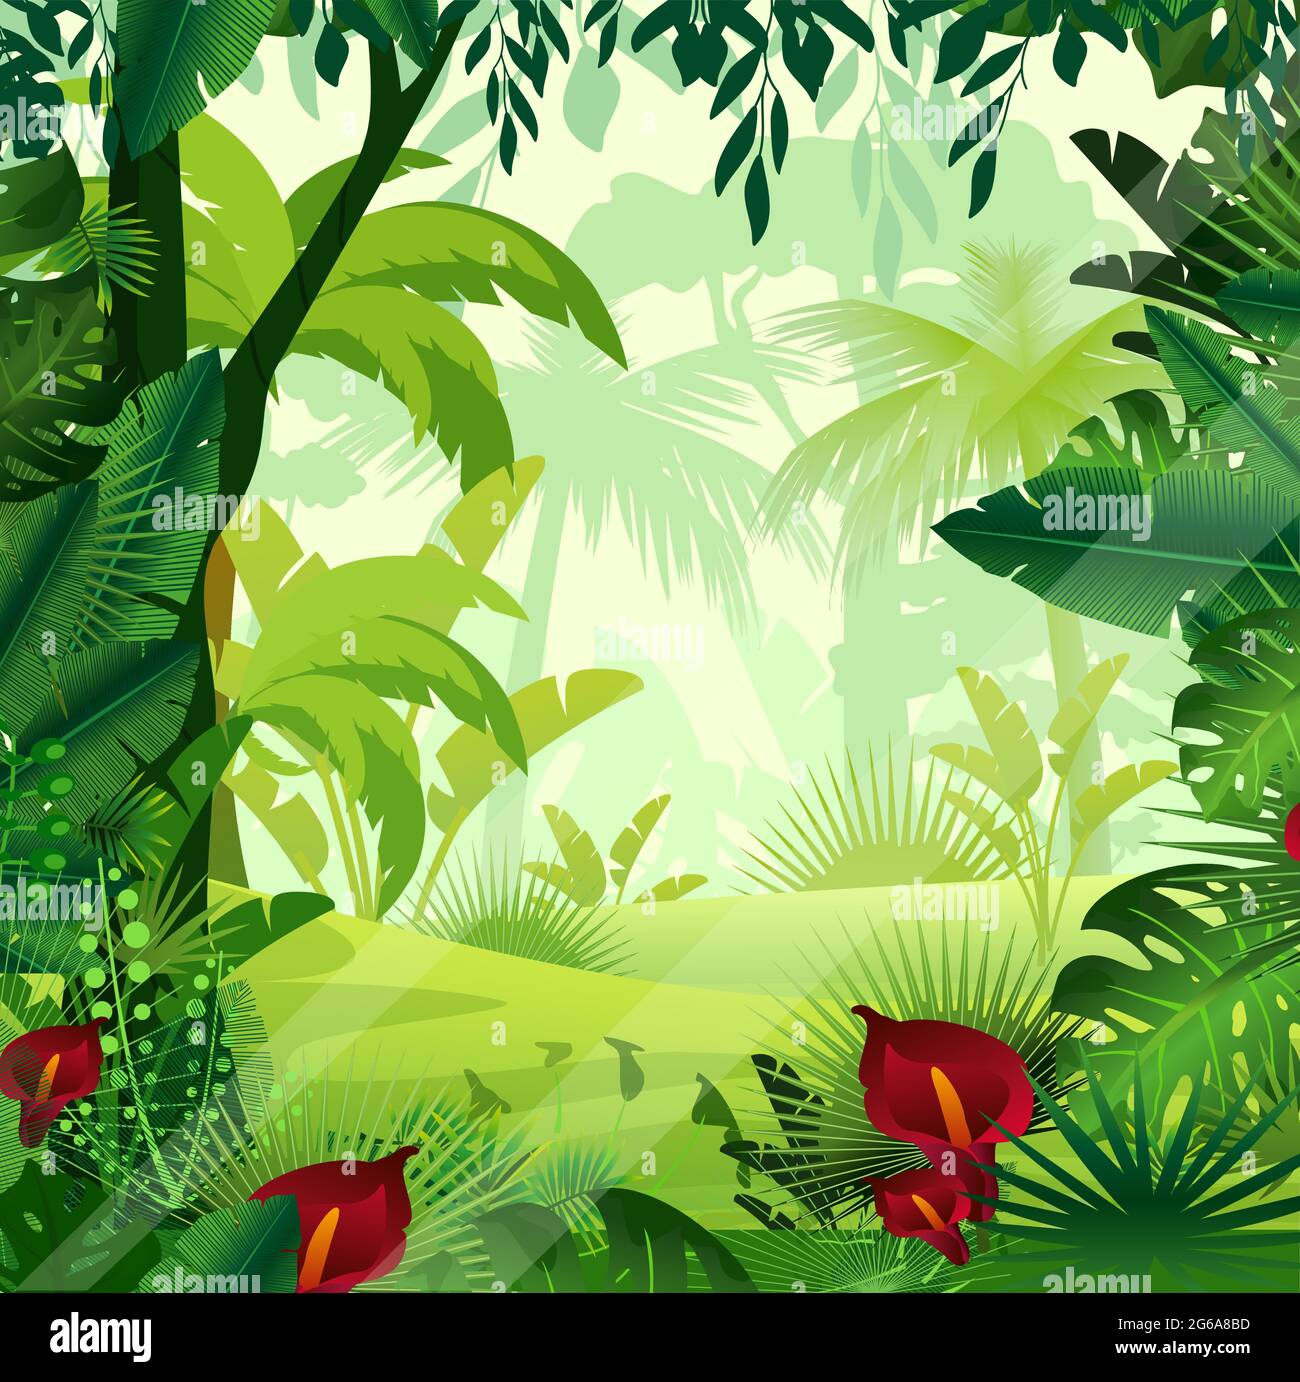 Vector illustration of background jungle lawn in morning time. Bright colorful jungle with ferns, trees, bushes, vines and flowers in cartoon style. Stock Vector